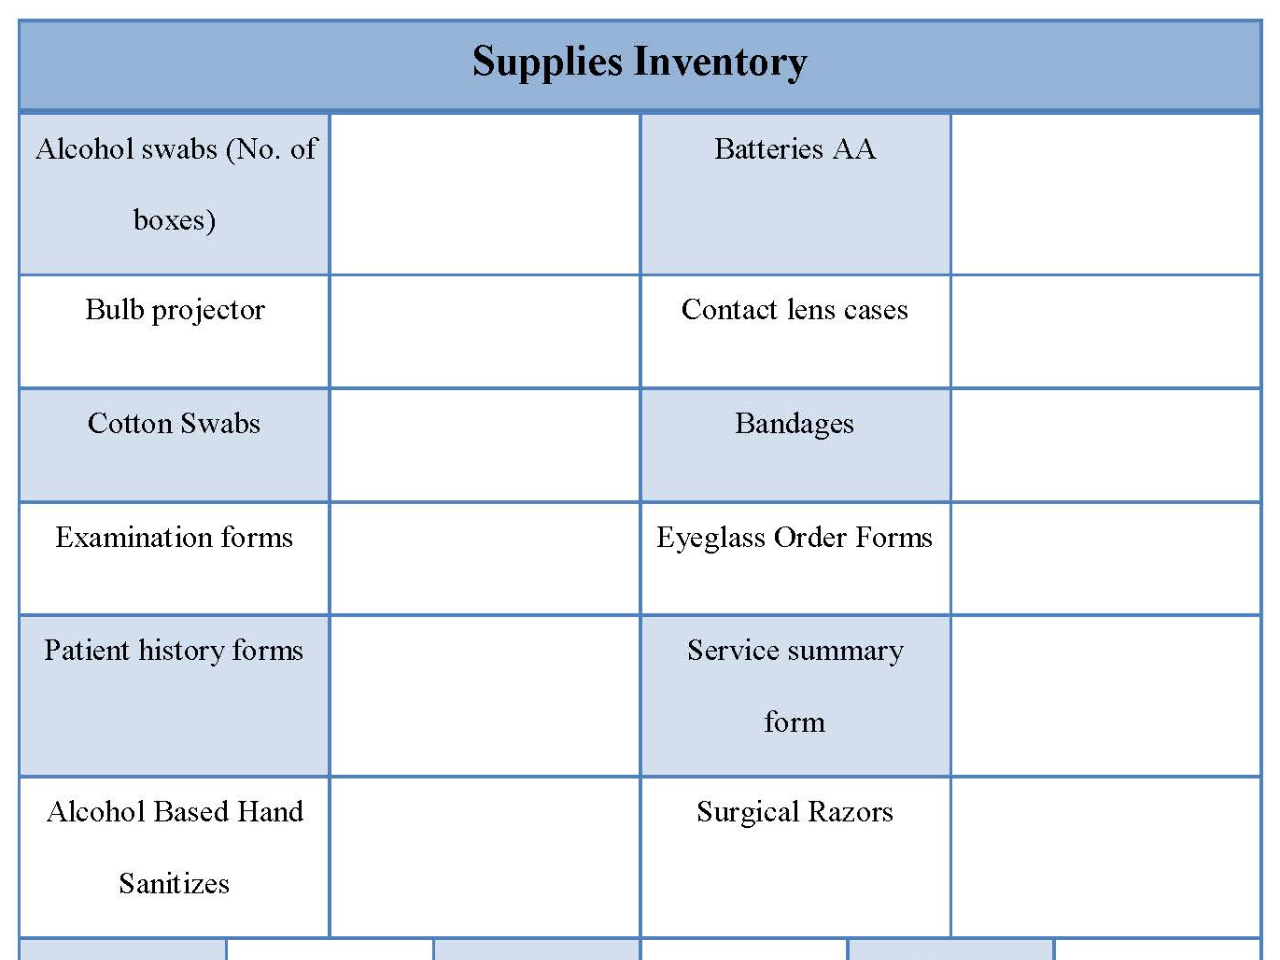 Supplies Inventory Form